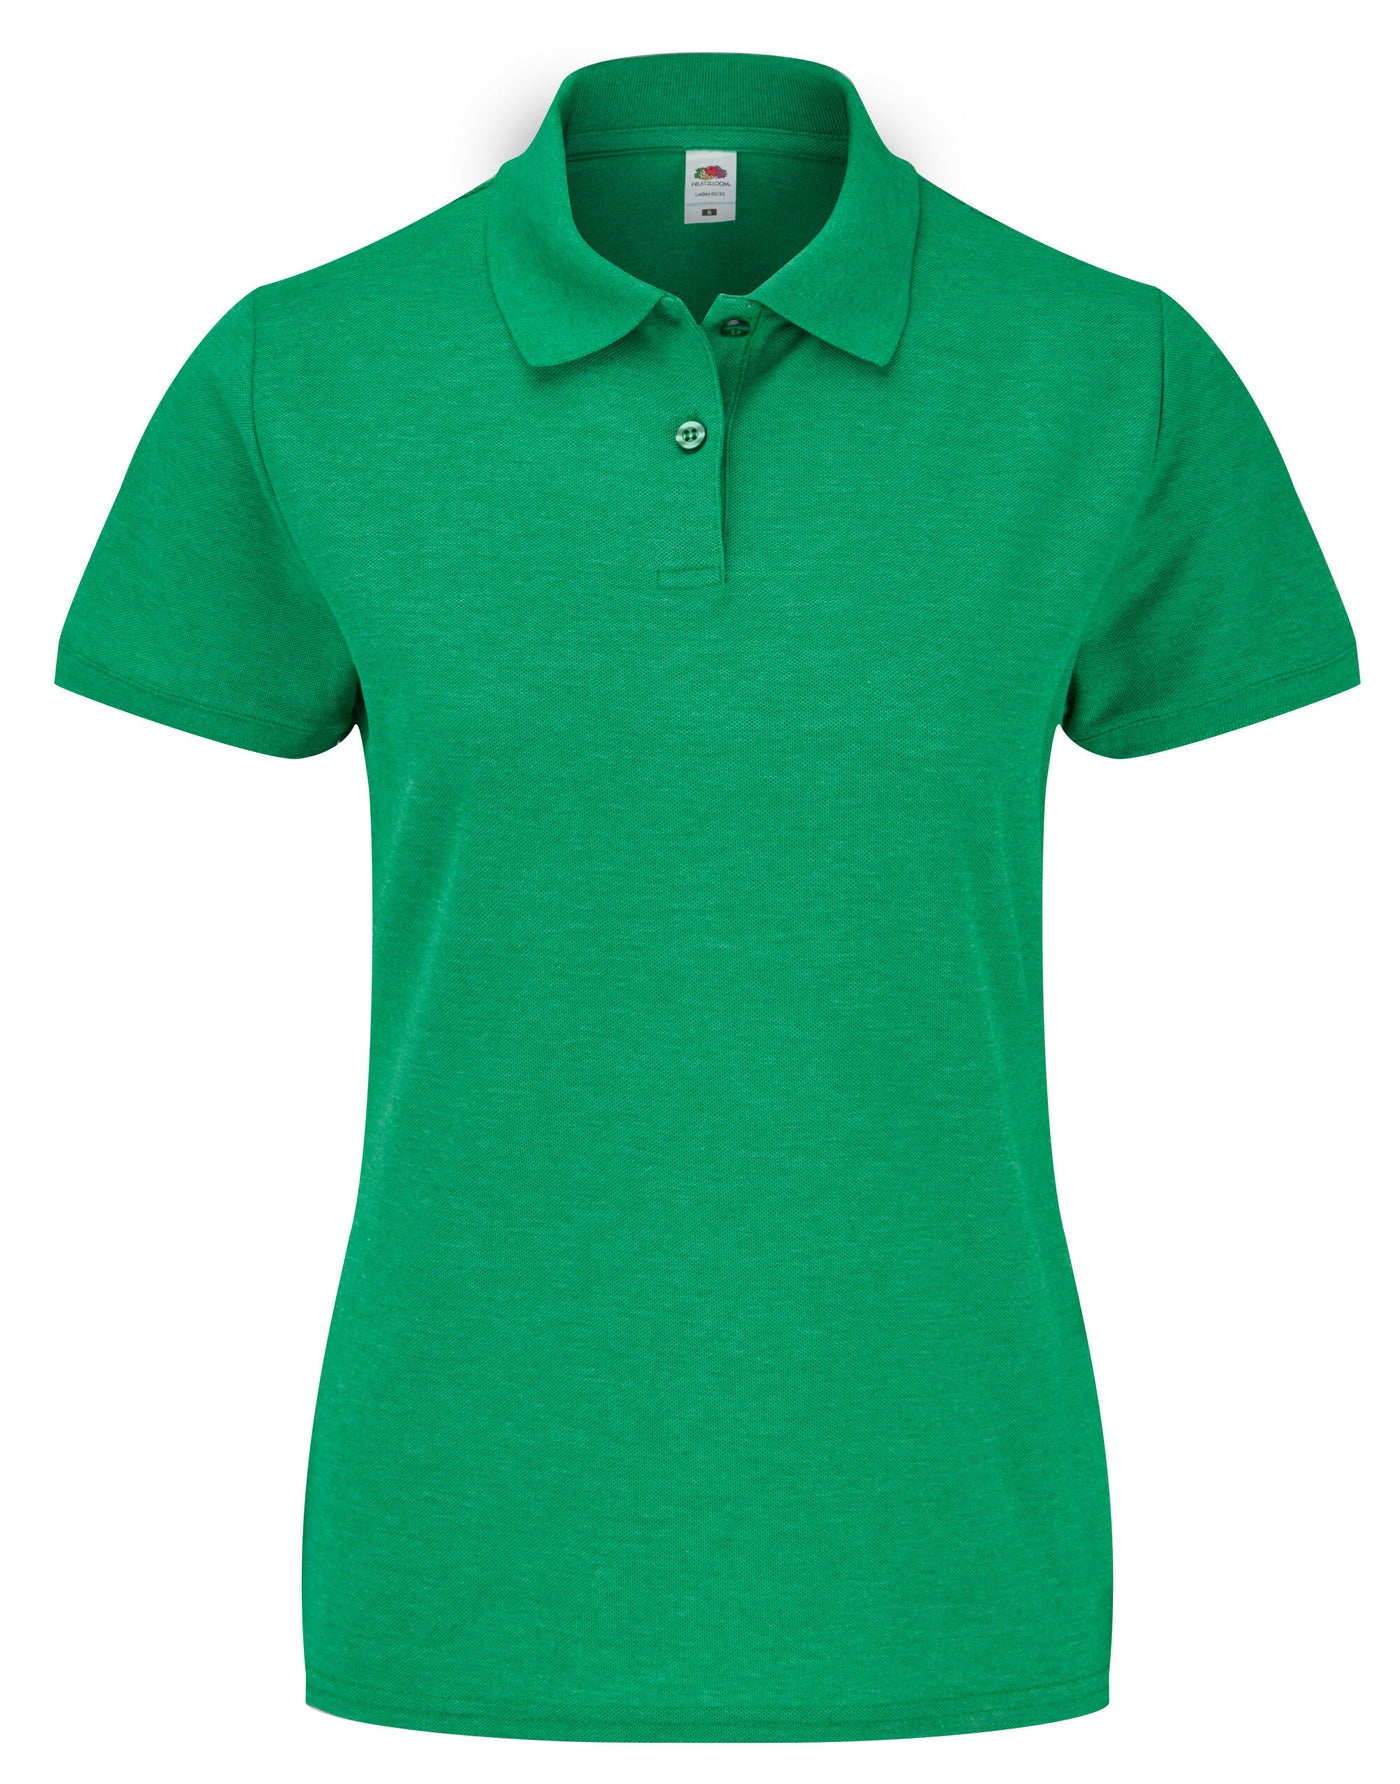 Ladies Fit Polo Shirt In Retro Heather Green